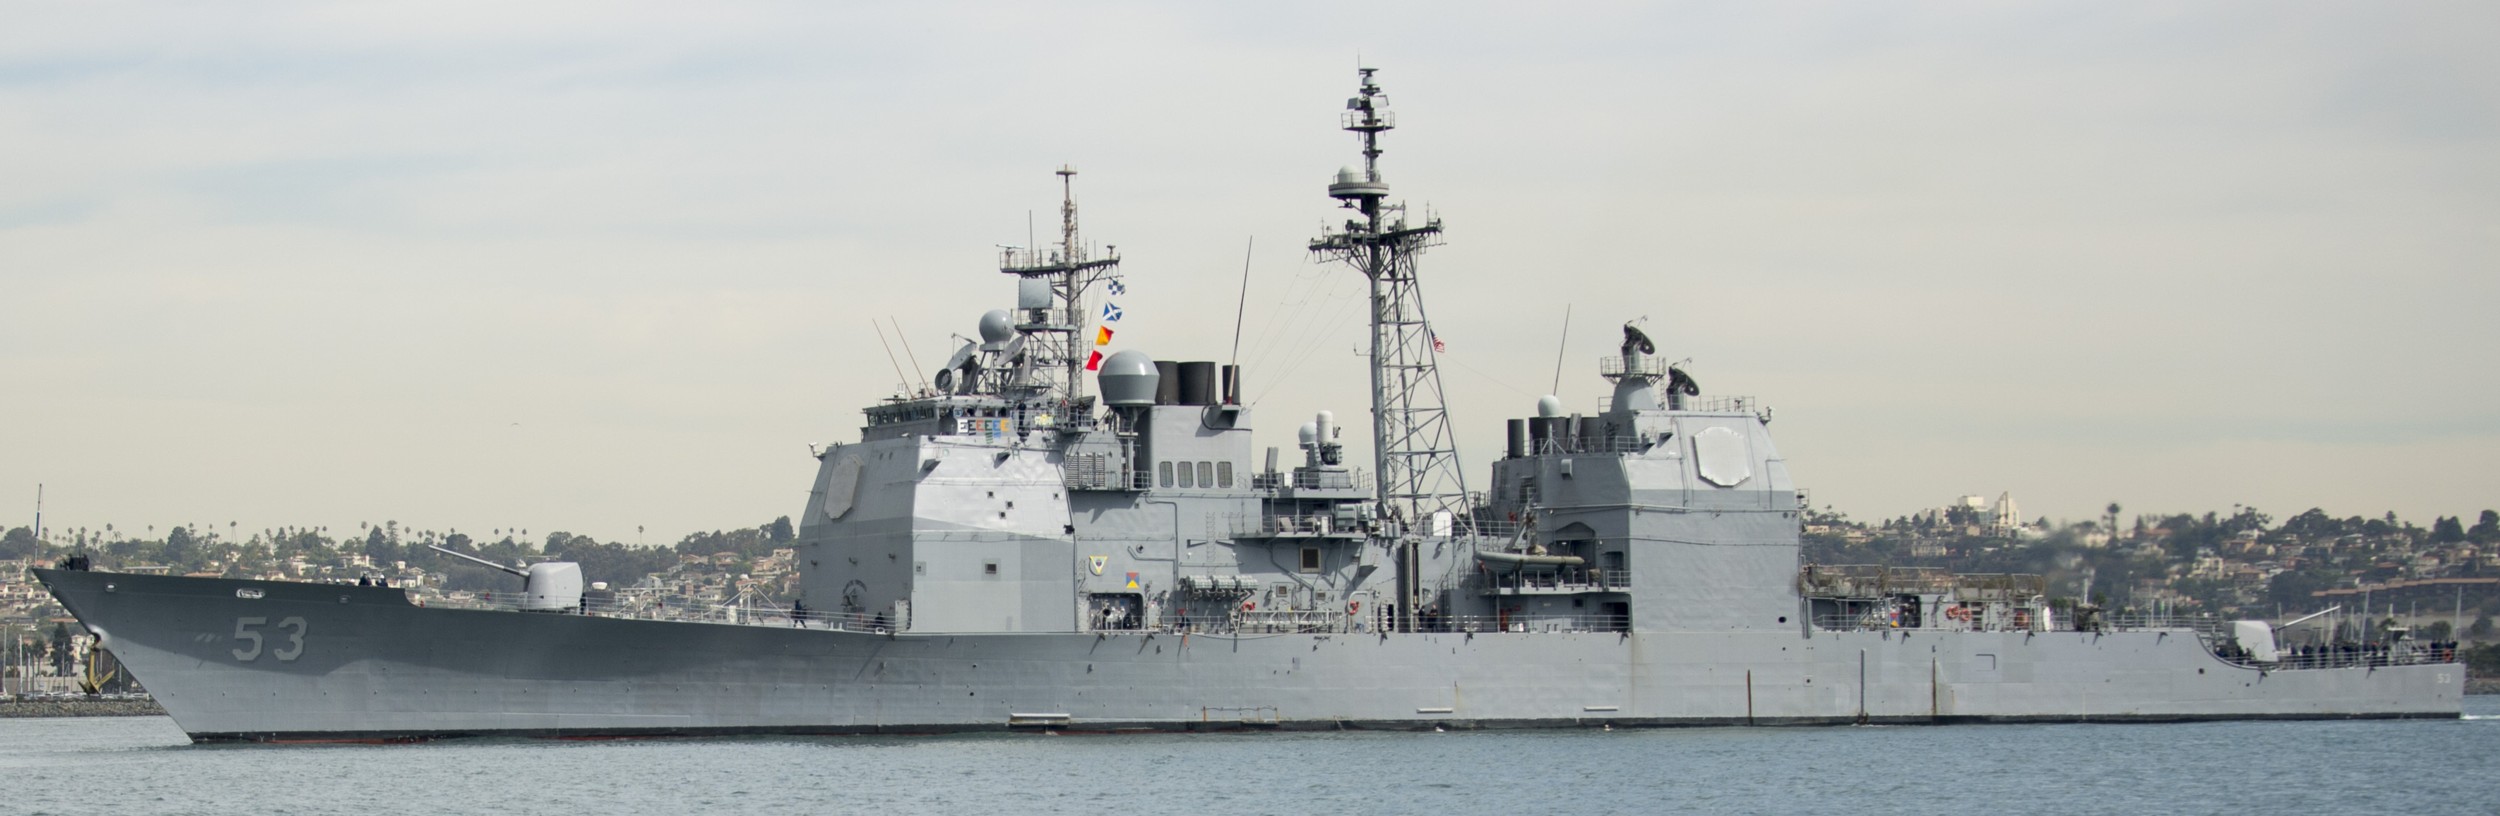 cg-53 uss mobile bay ticonderoga class guided missile cruiser aegis us navy 81